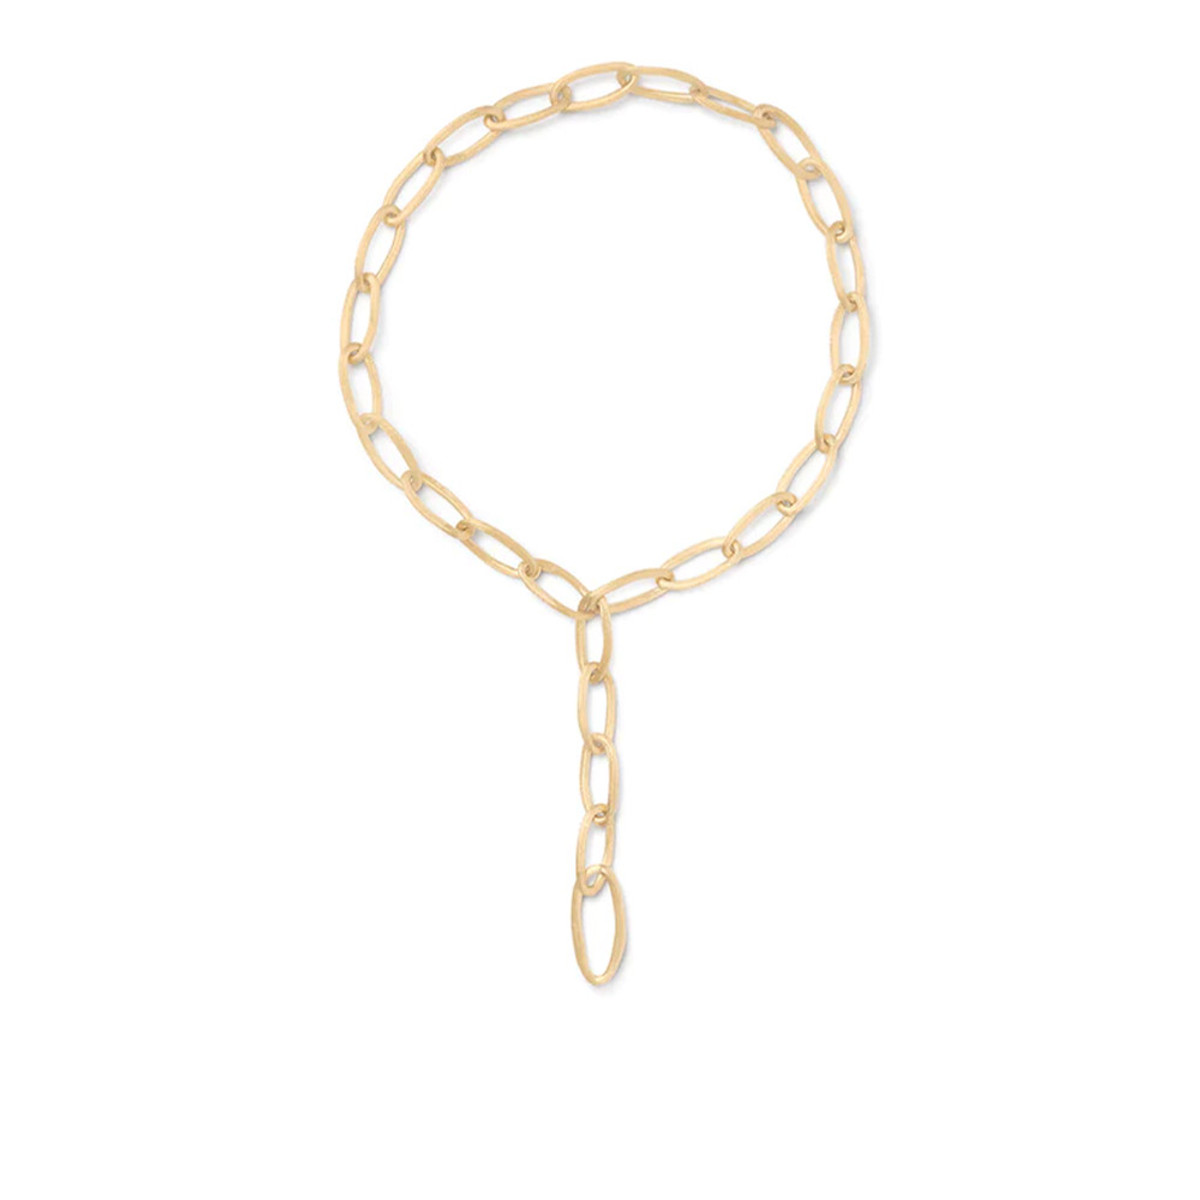 Marco Bicego Jaipur Link Collection 18K Yellow Gold Oval Link Convertible Lariat Necklace-44440